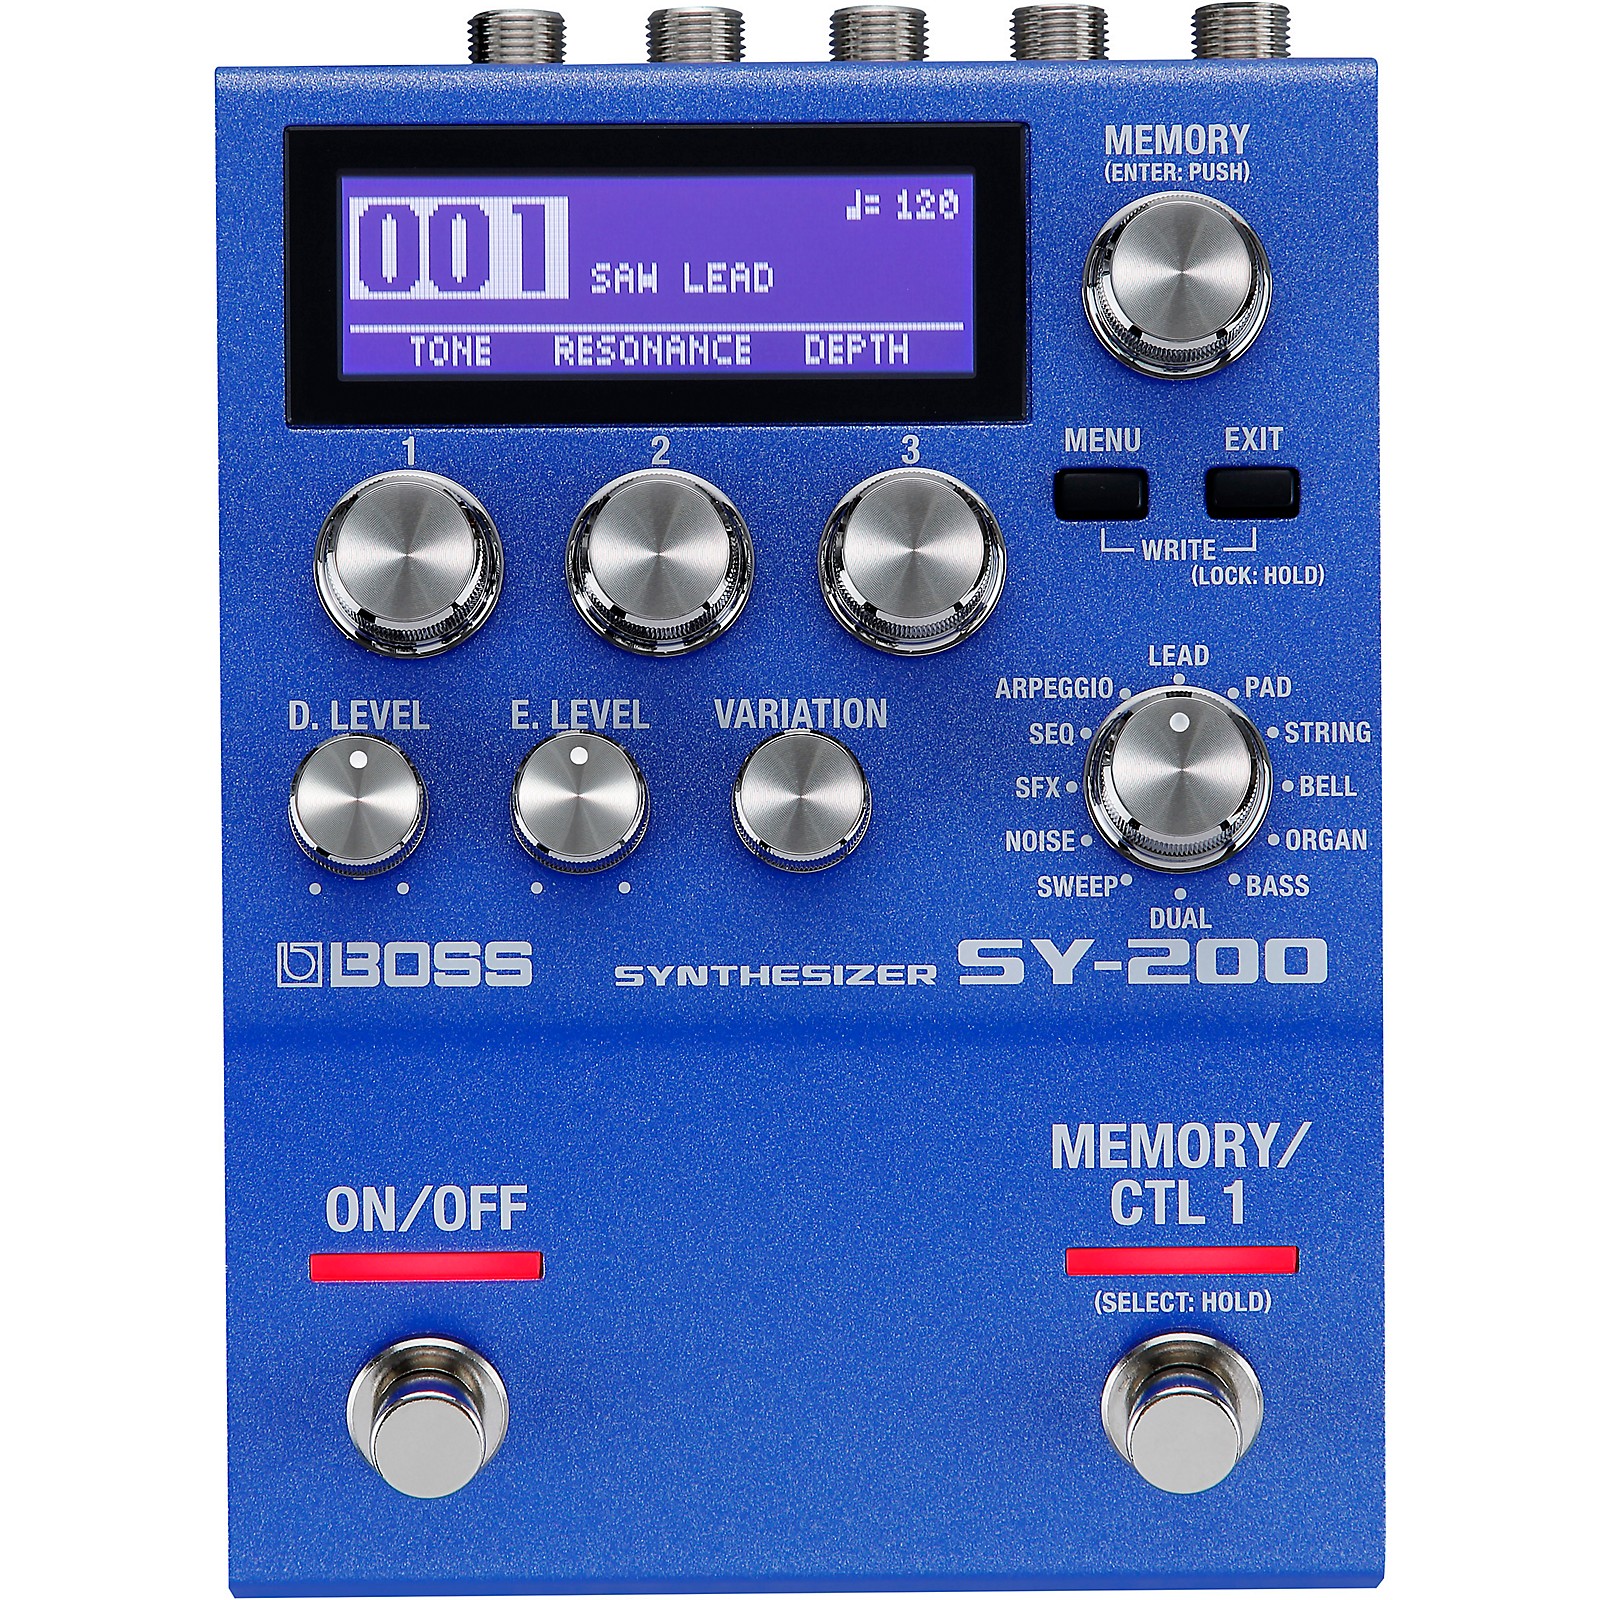 BOSS BOSS SY-200 Synthesizer Effects Pedal